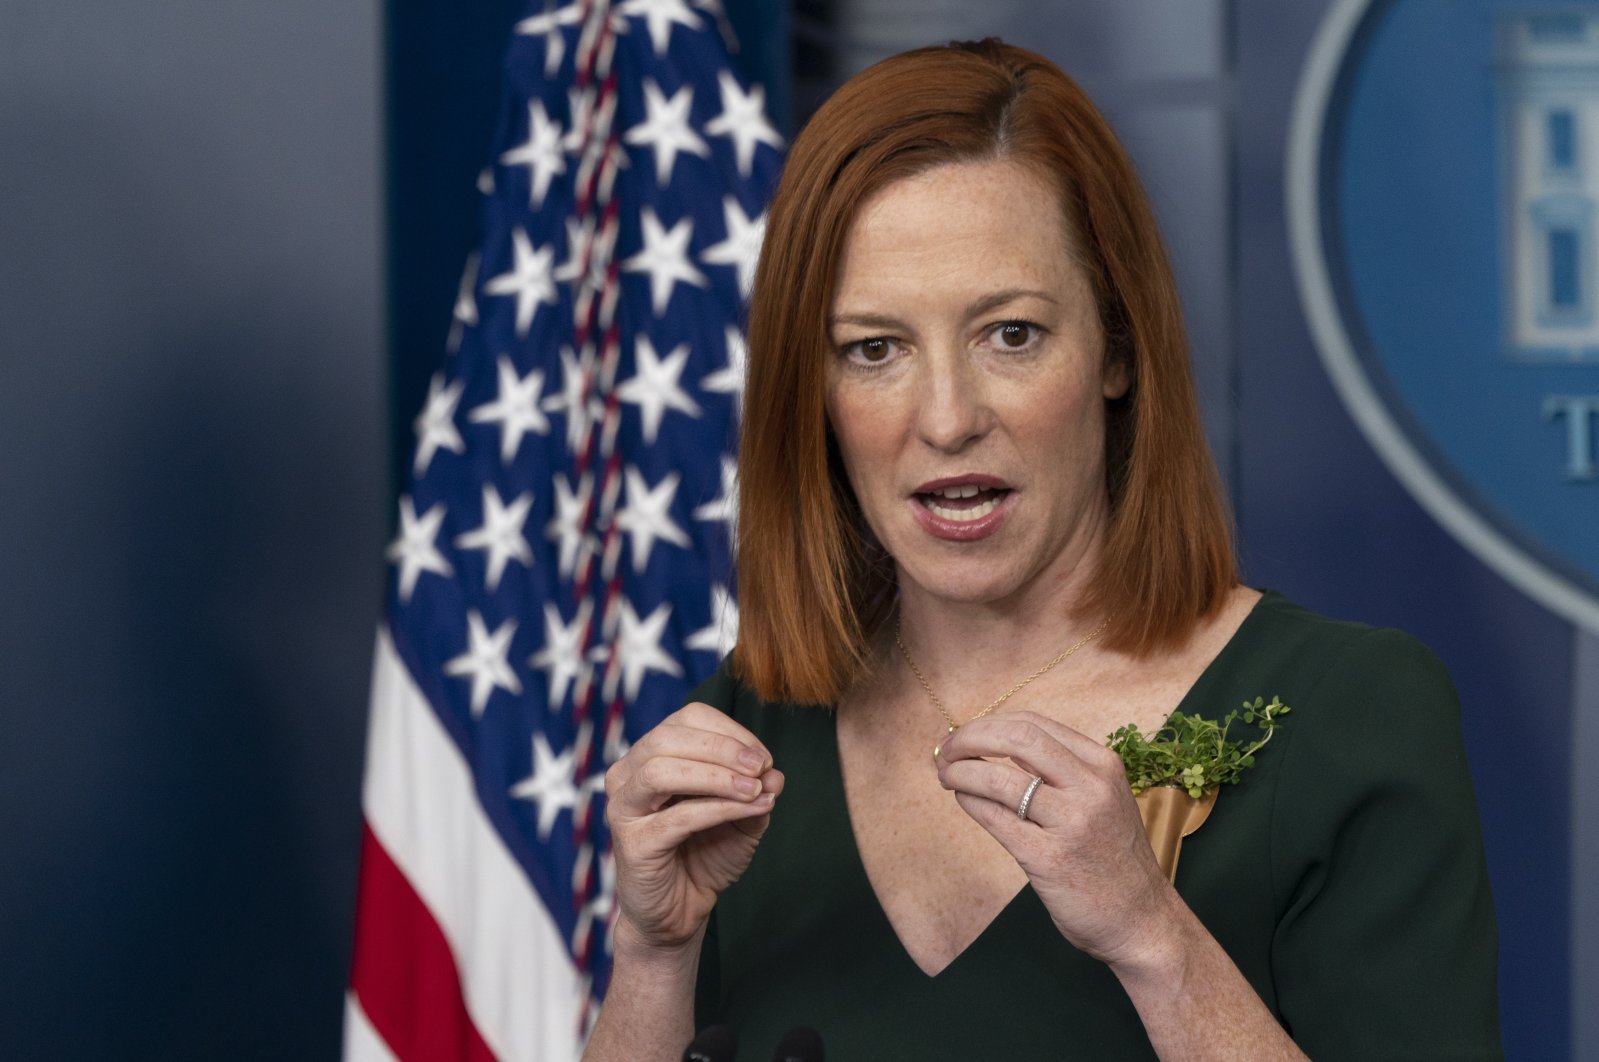 White House Press Secretary Jen Psaki holds a briefing at the White House in Washington, D.C., March 17, 2021.  (EPA/Chris Kleponis / POOL)